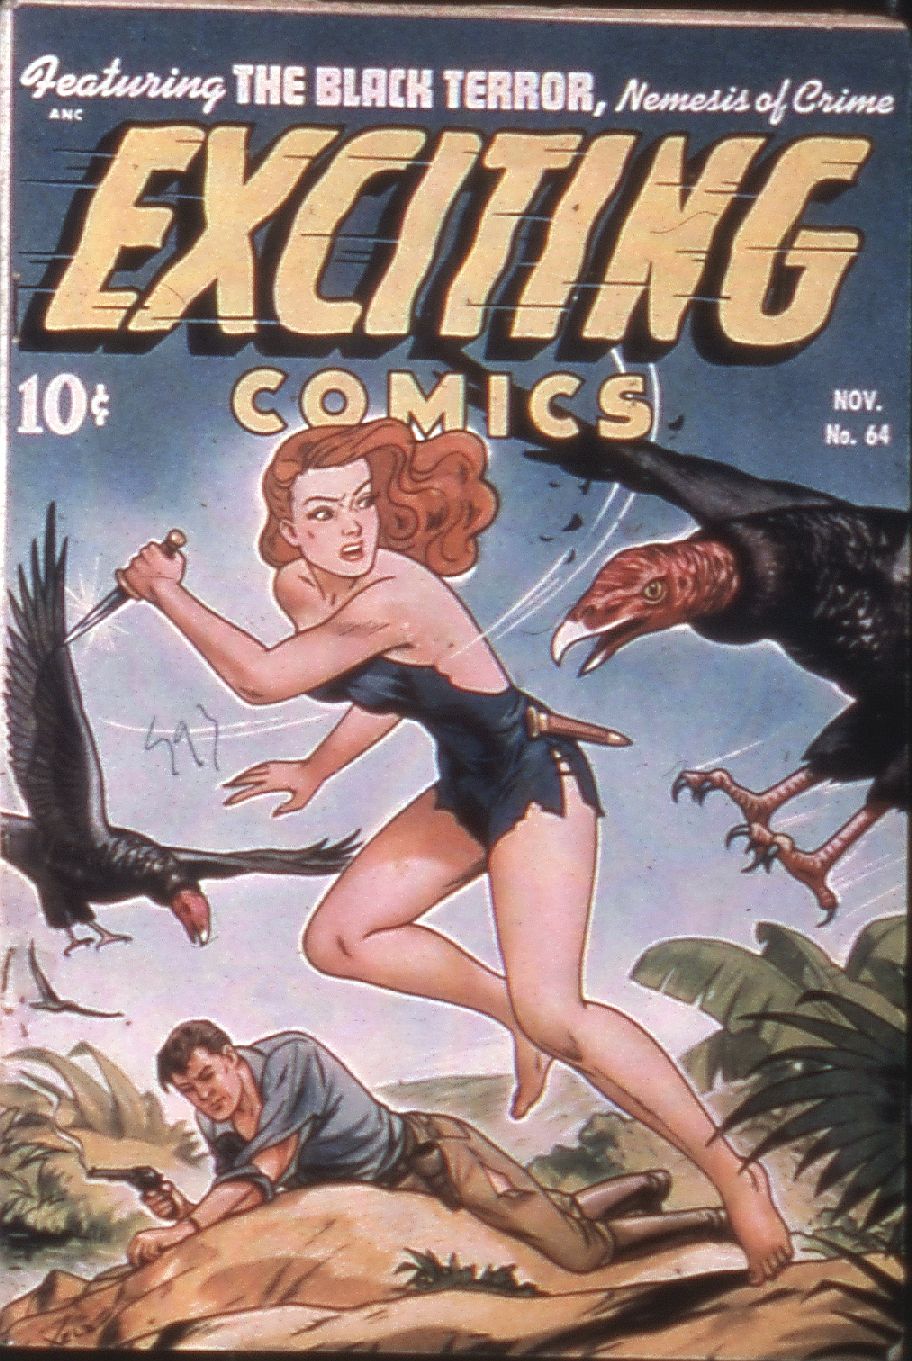 cover of exciting comics #64